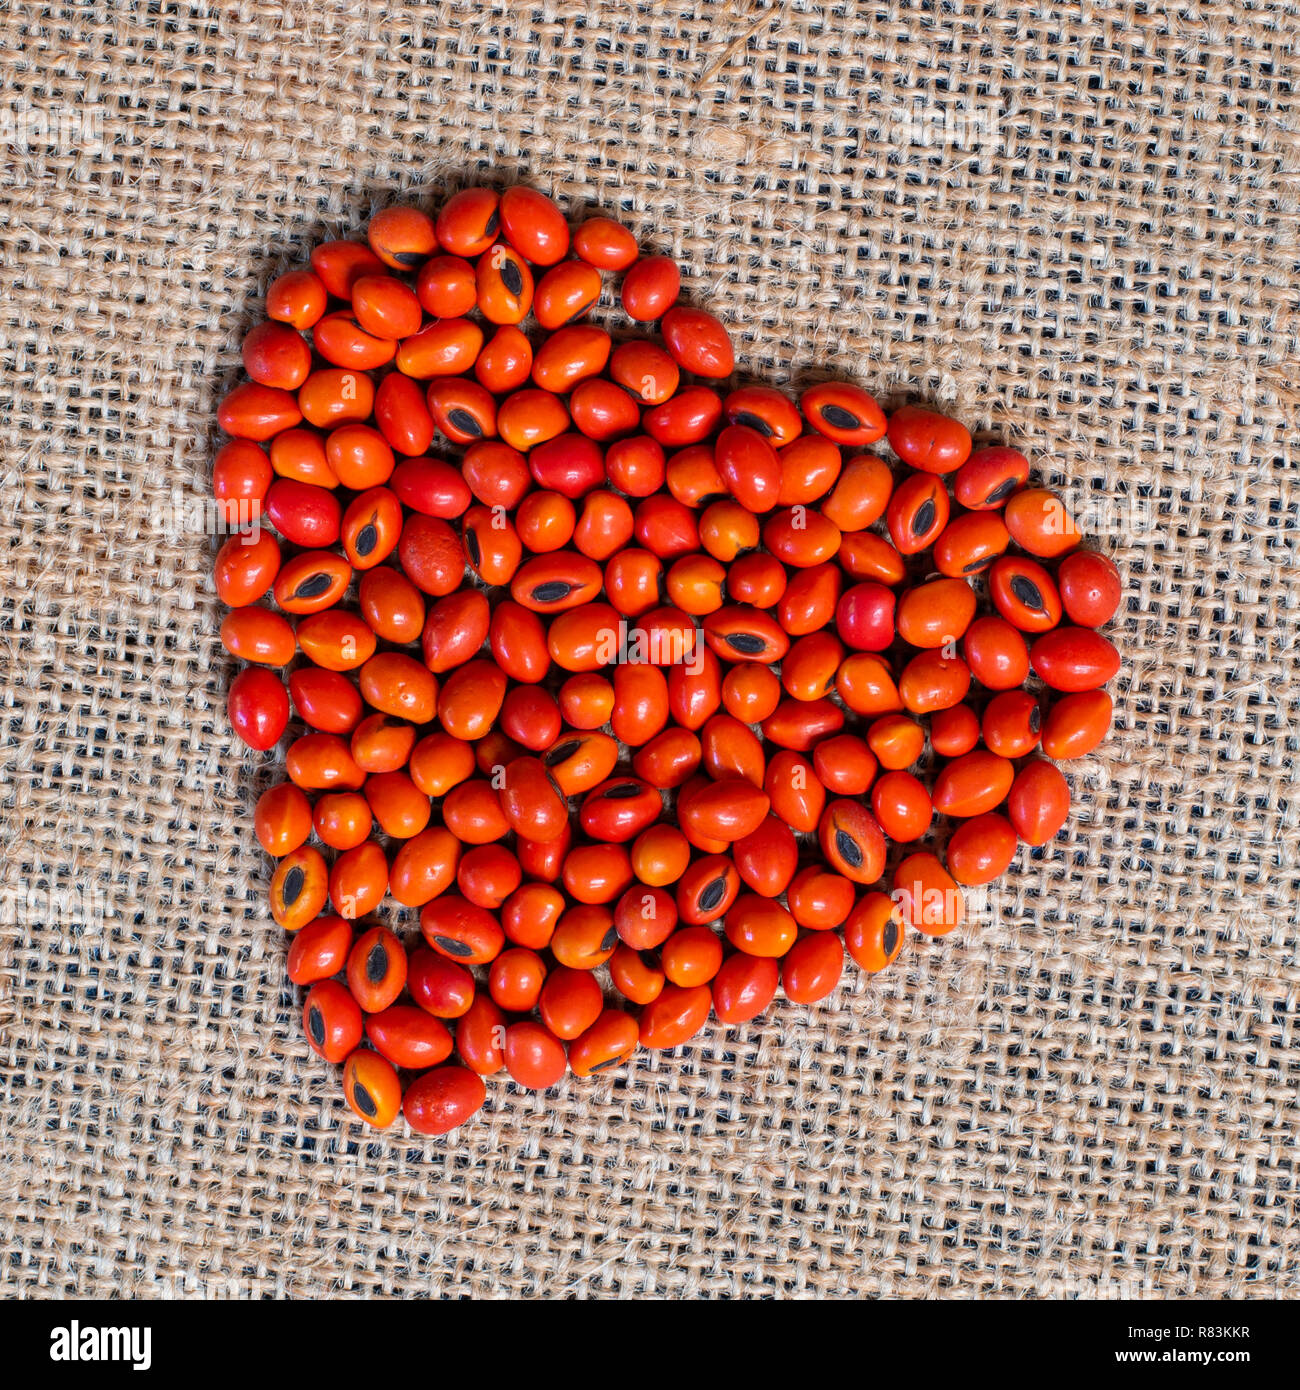 Coral tree seeds arranged in a heart shape. Stock Photo